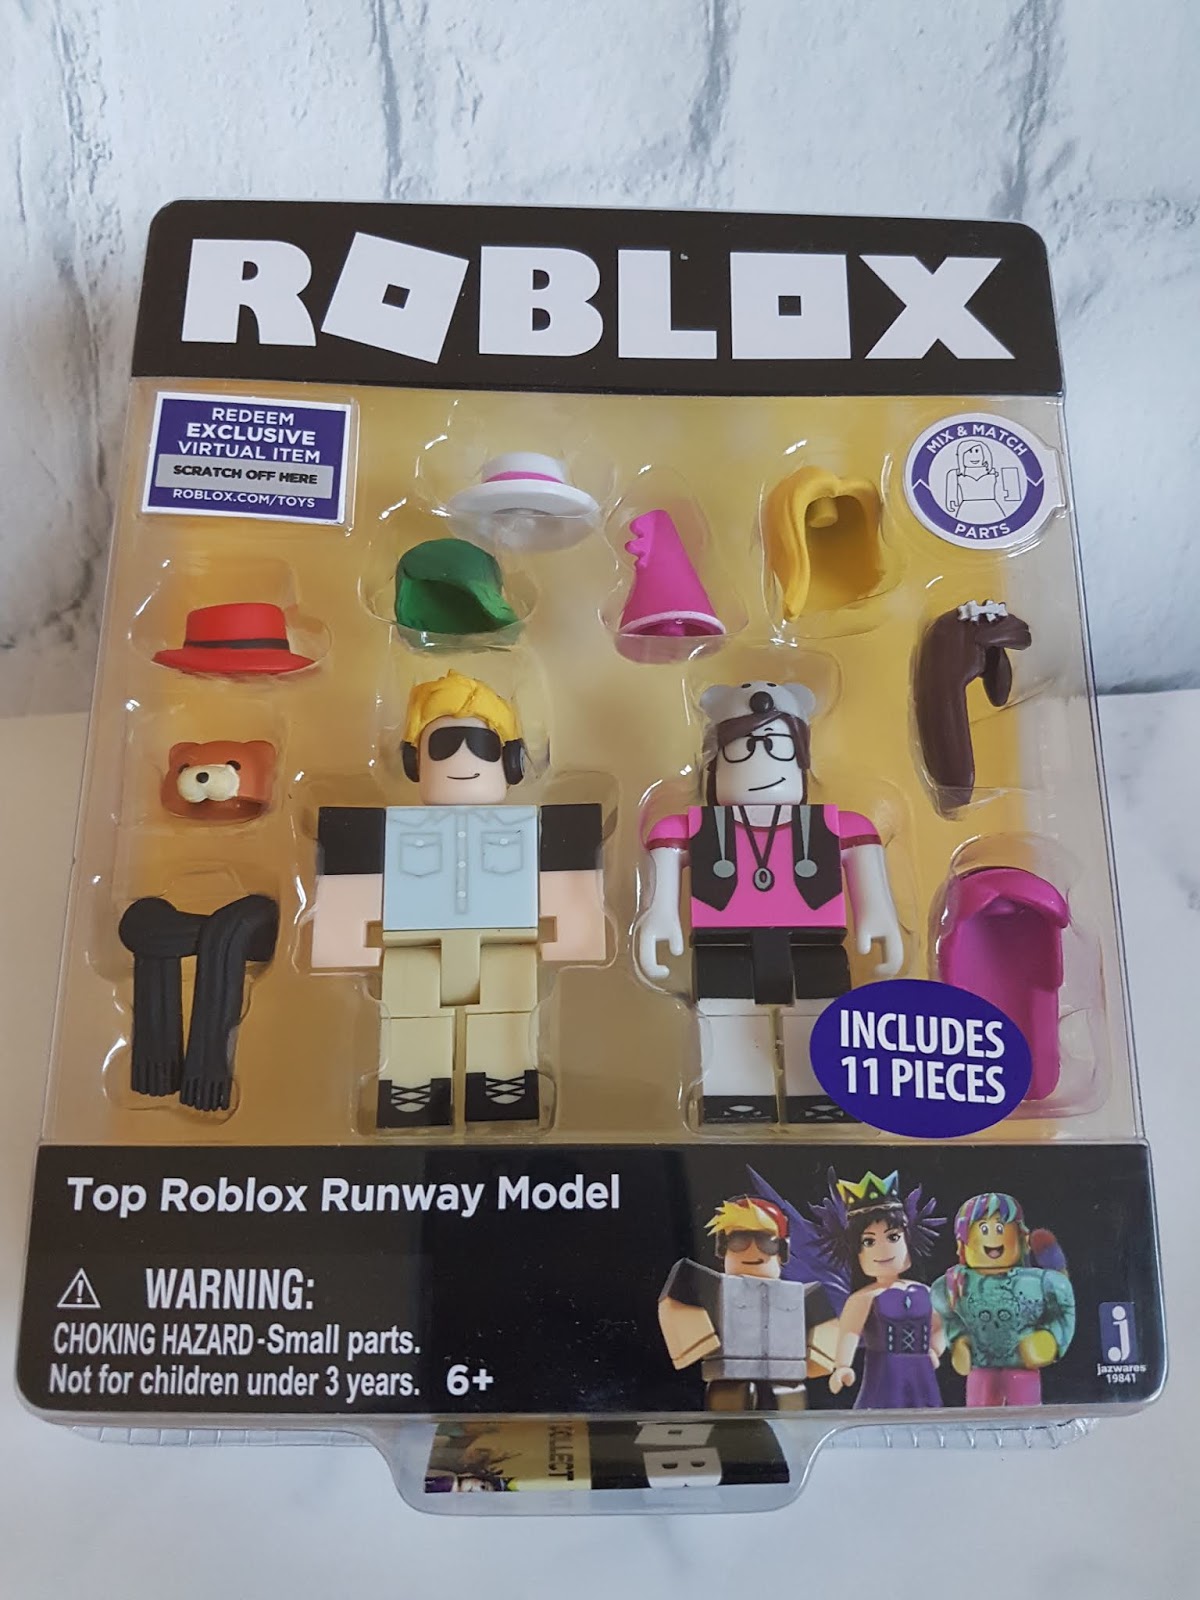 Mummy Of 3 Diaries Roblox Celebrity Series 1 Review - roblox top runway model celebrity collection kids toy figure collectible gift